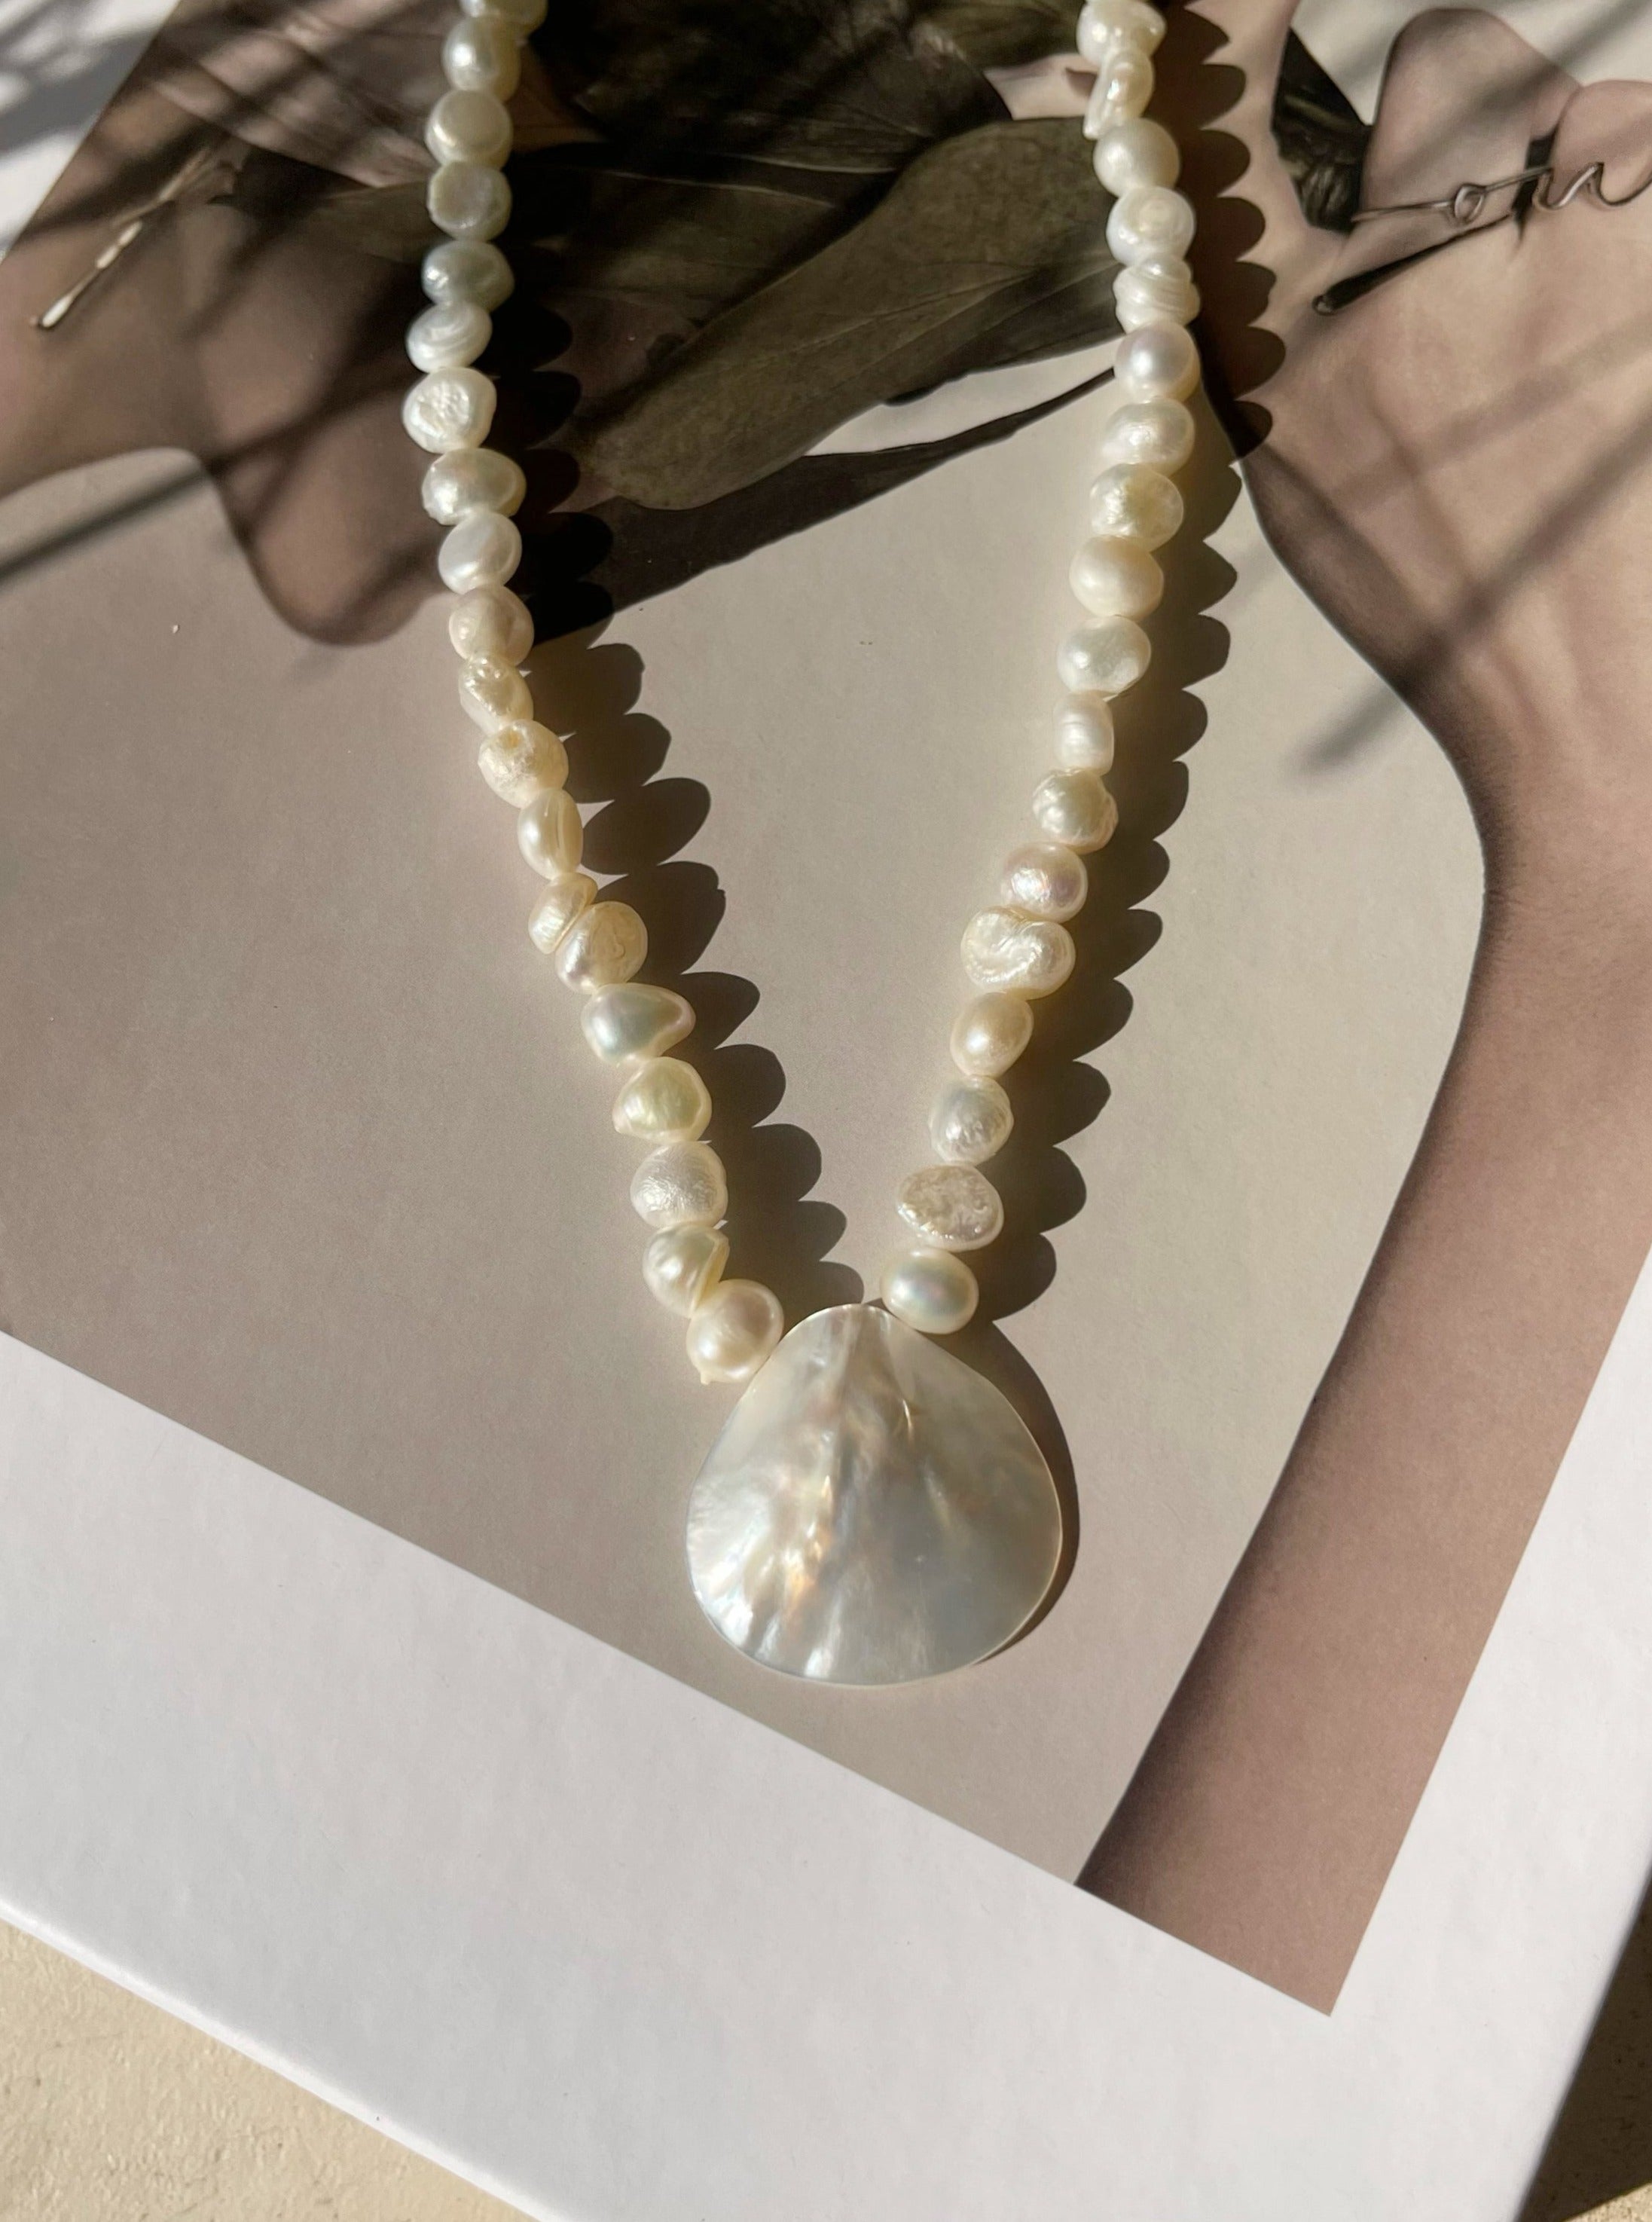 Mermaid Pearl Choker Necklace - Ideal for bohemian fashion lovers, suitable for beach vacations, beach weddings, or daily fashion. Offers minimalistic, boho, and beach-inspired style.